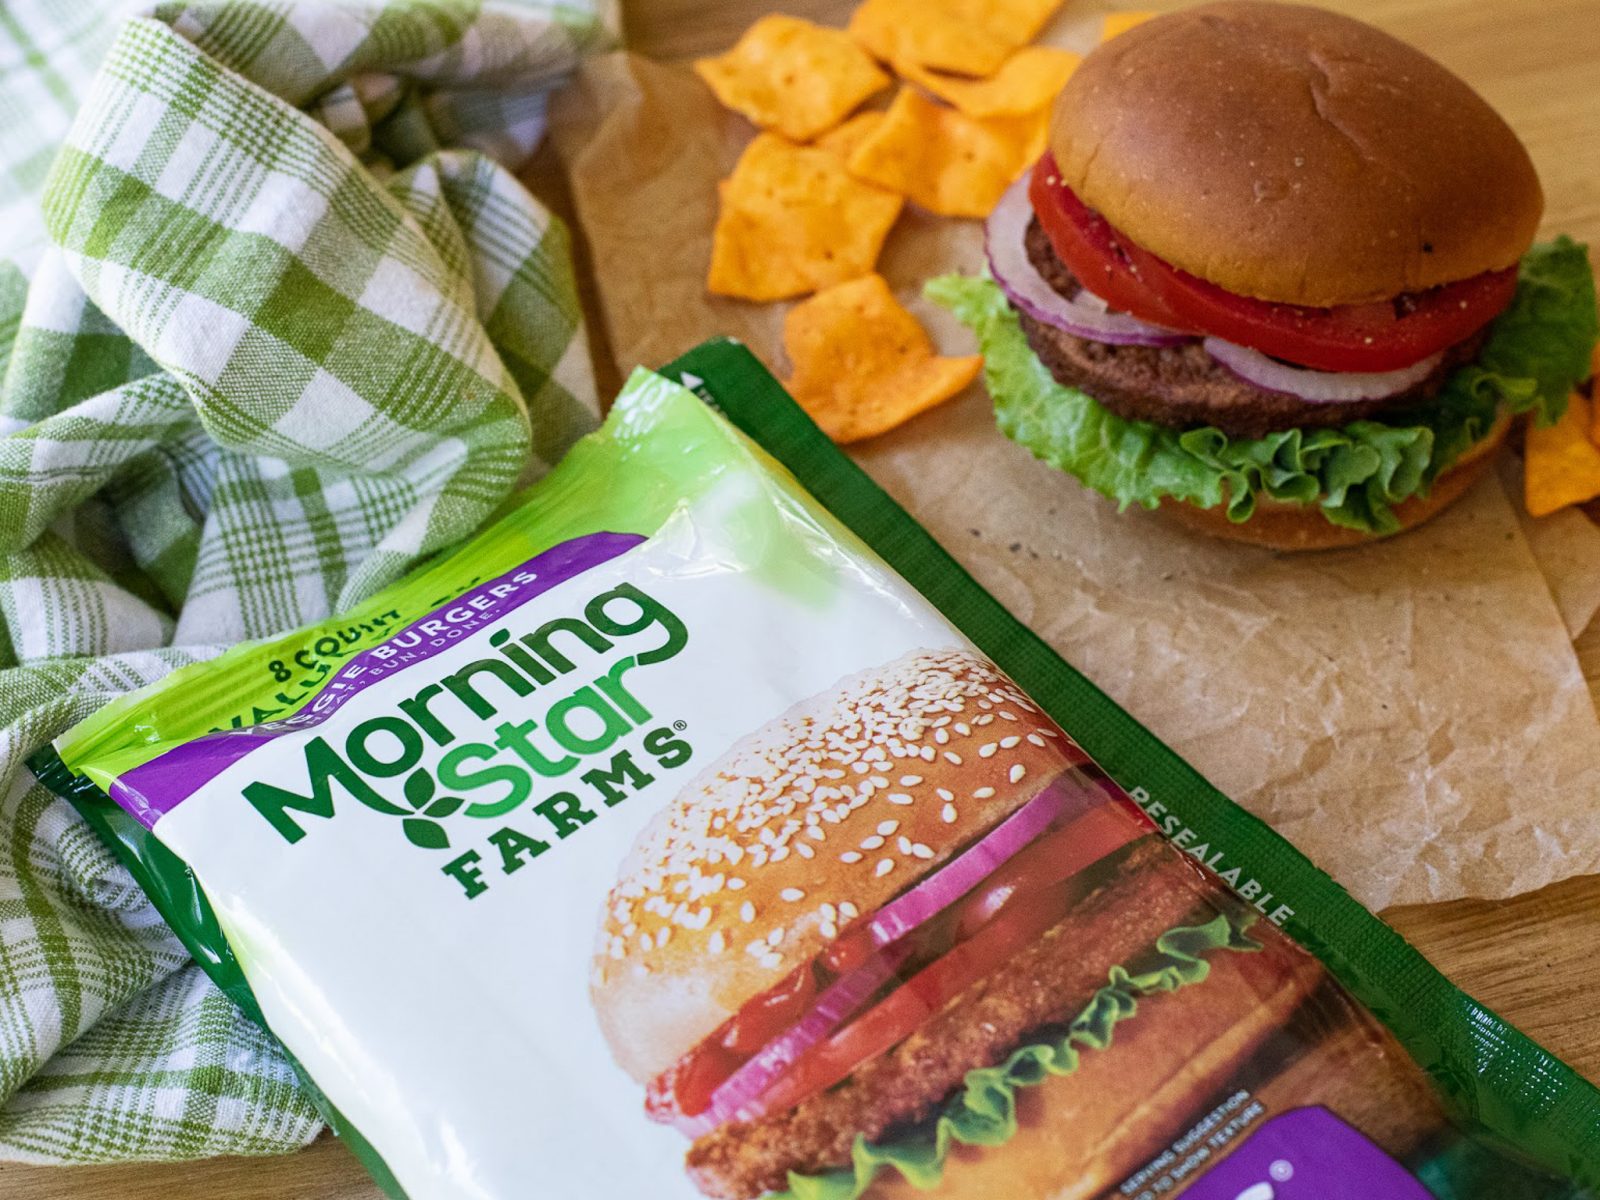 Get MorningStar Farms Veggie Entrees As Low As $2.50 At Publix